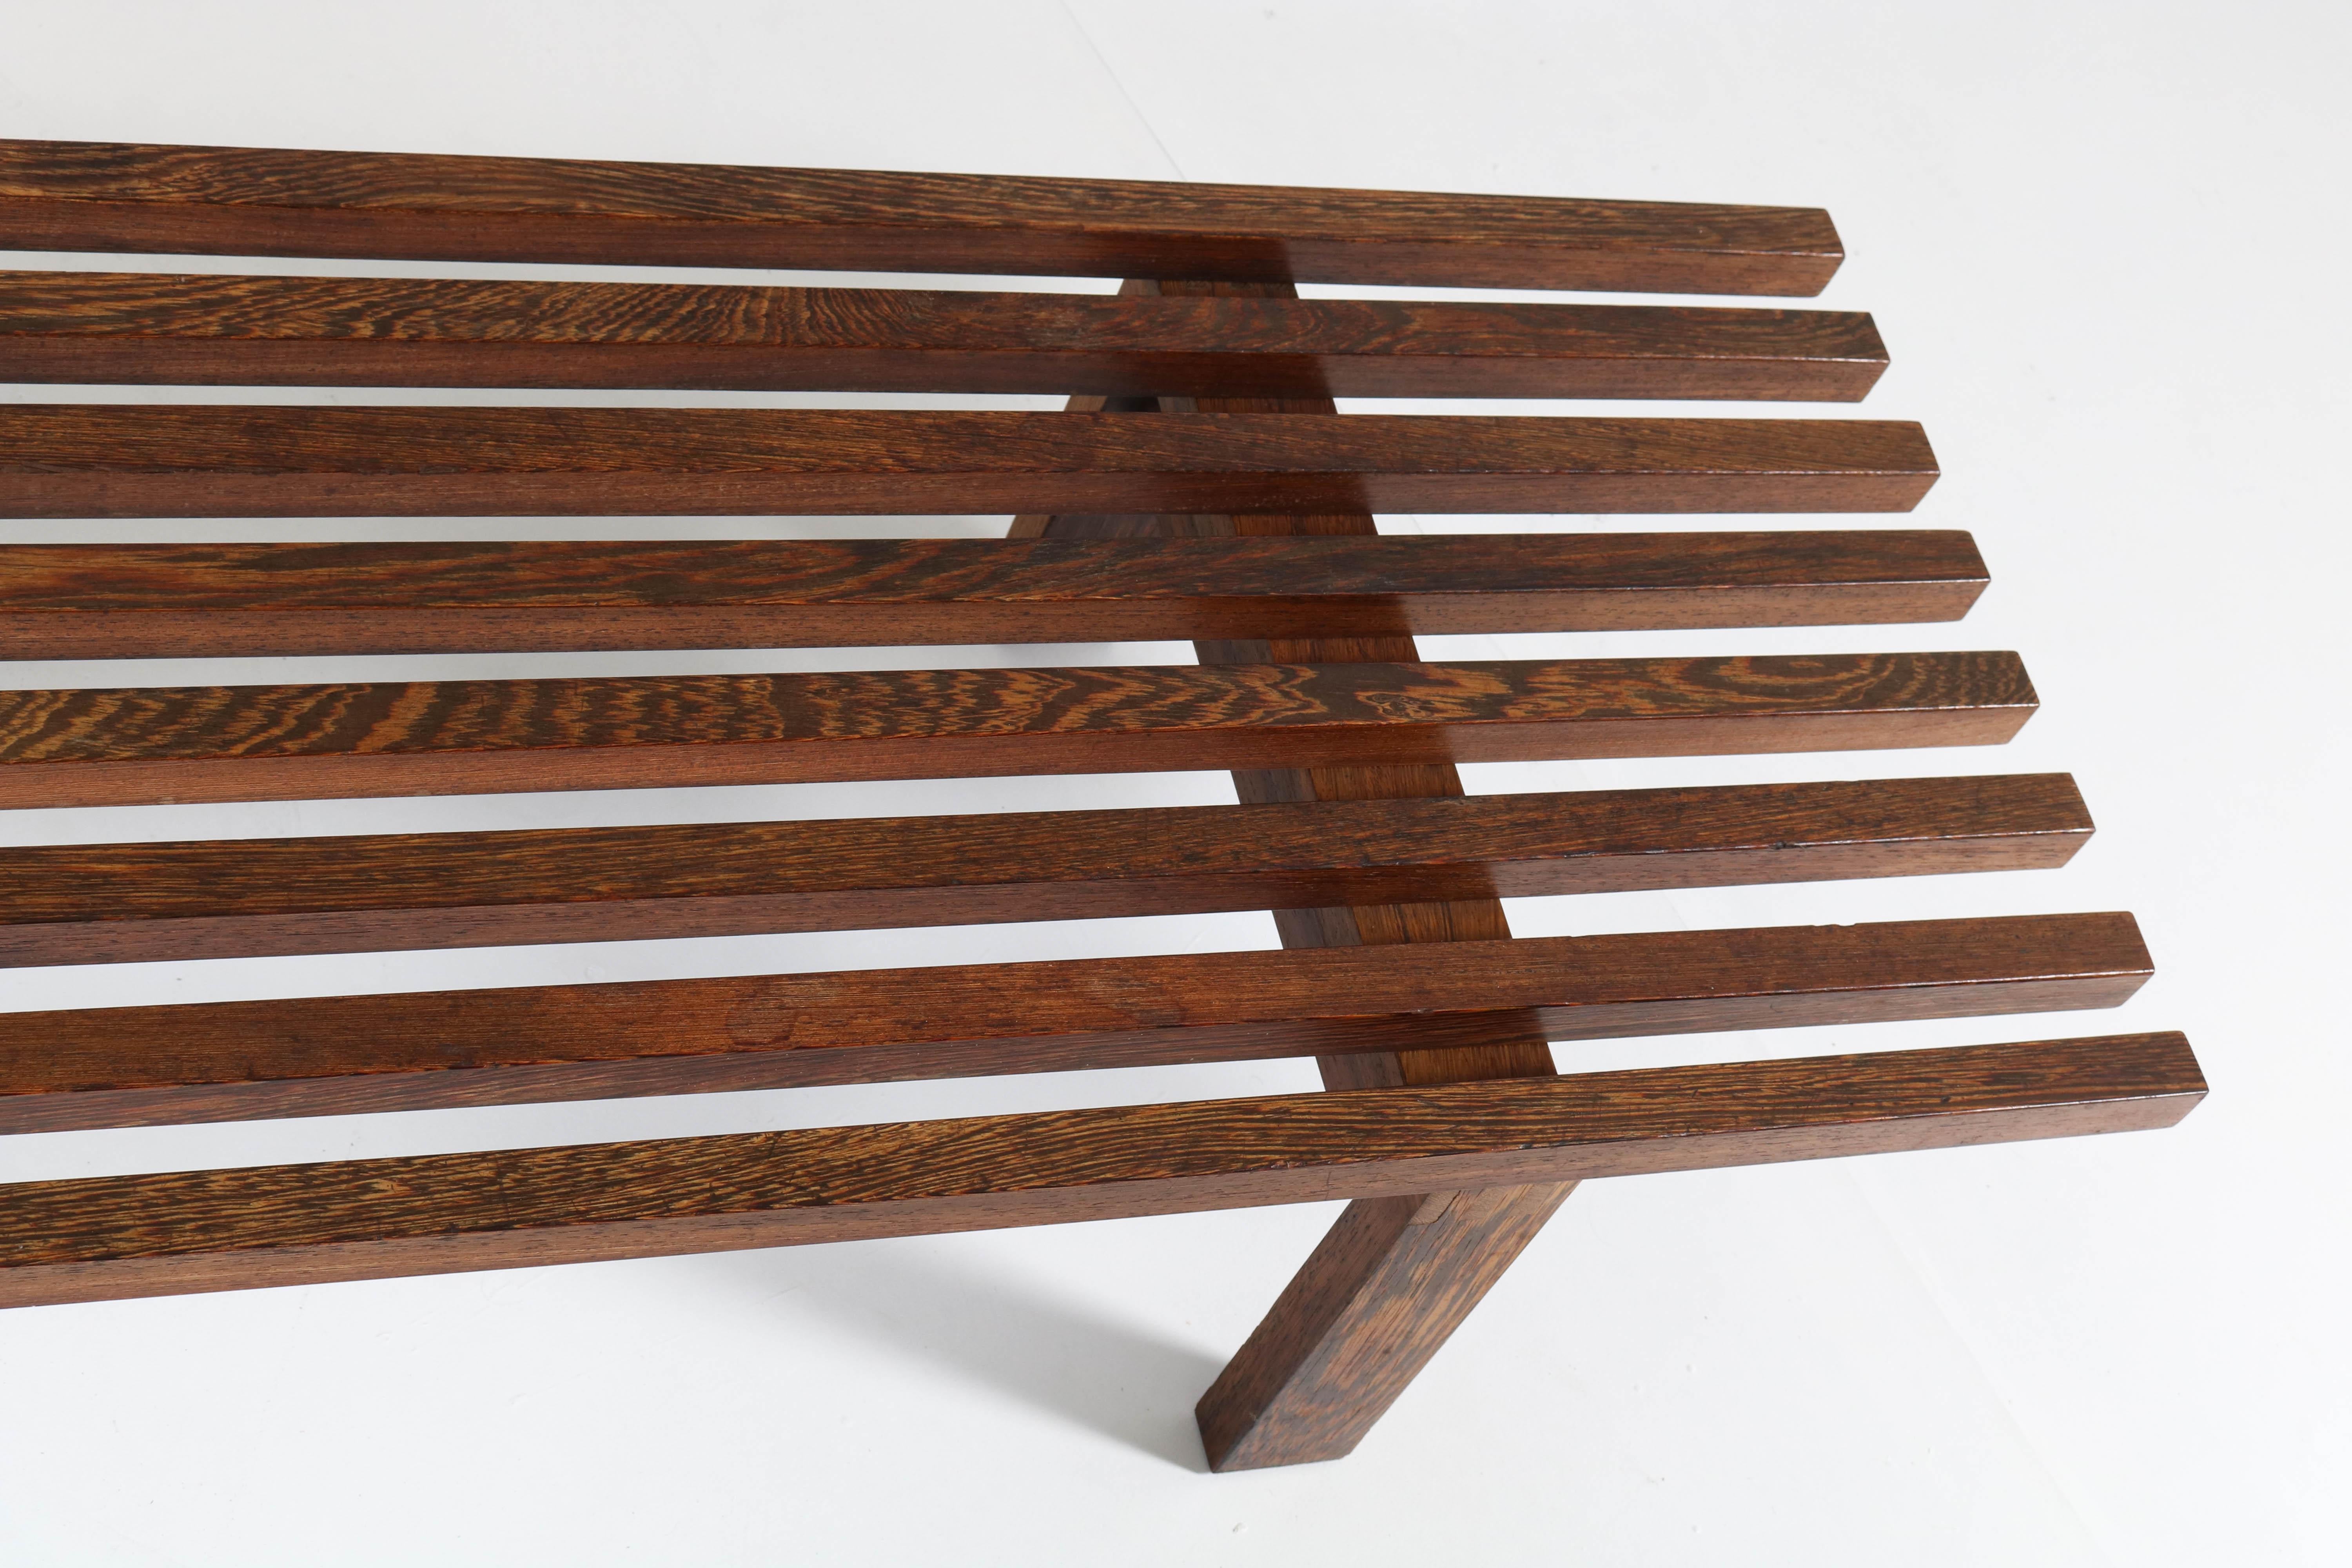 Large wenge Mid-Century Modern slat bench.
Design by Martin Visser for 't Spectrum.
Striking Dutch design from the sixties.
In good original condition with minor wear consistent with age and use,
preserving a beautiful patina.
 